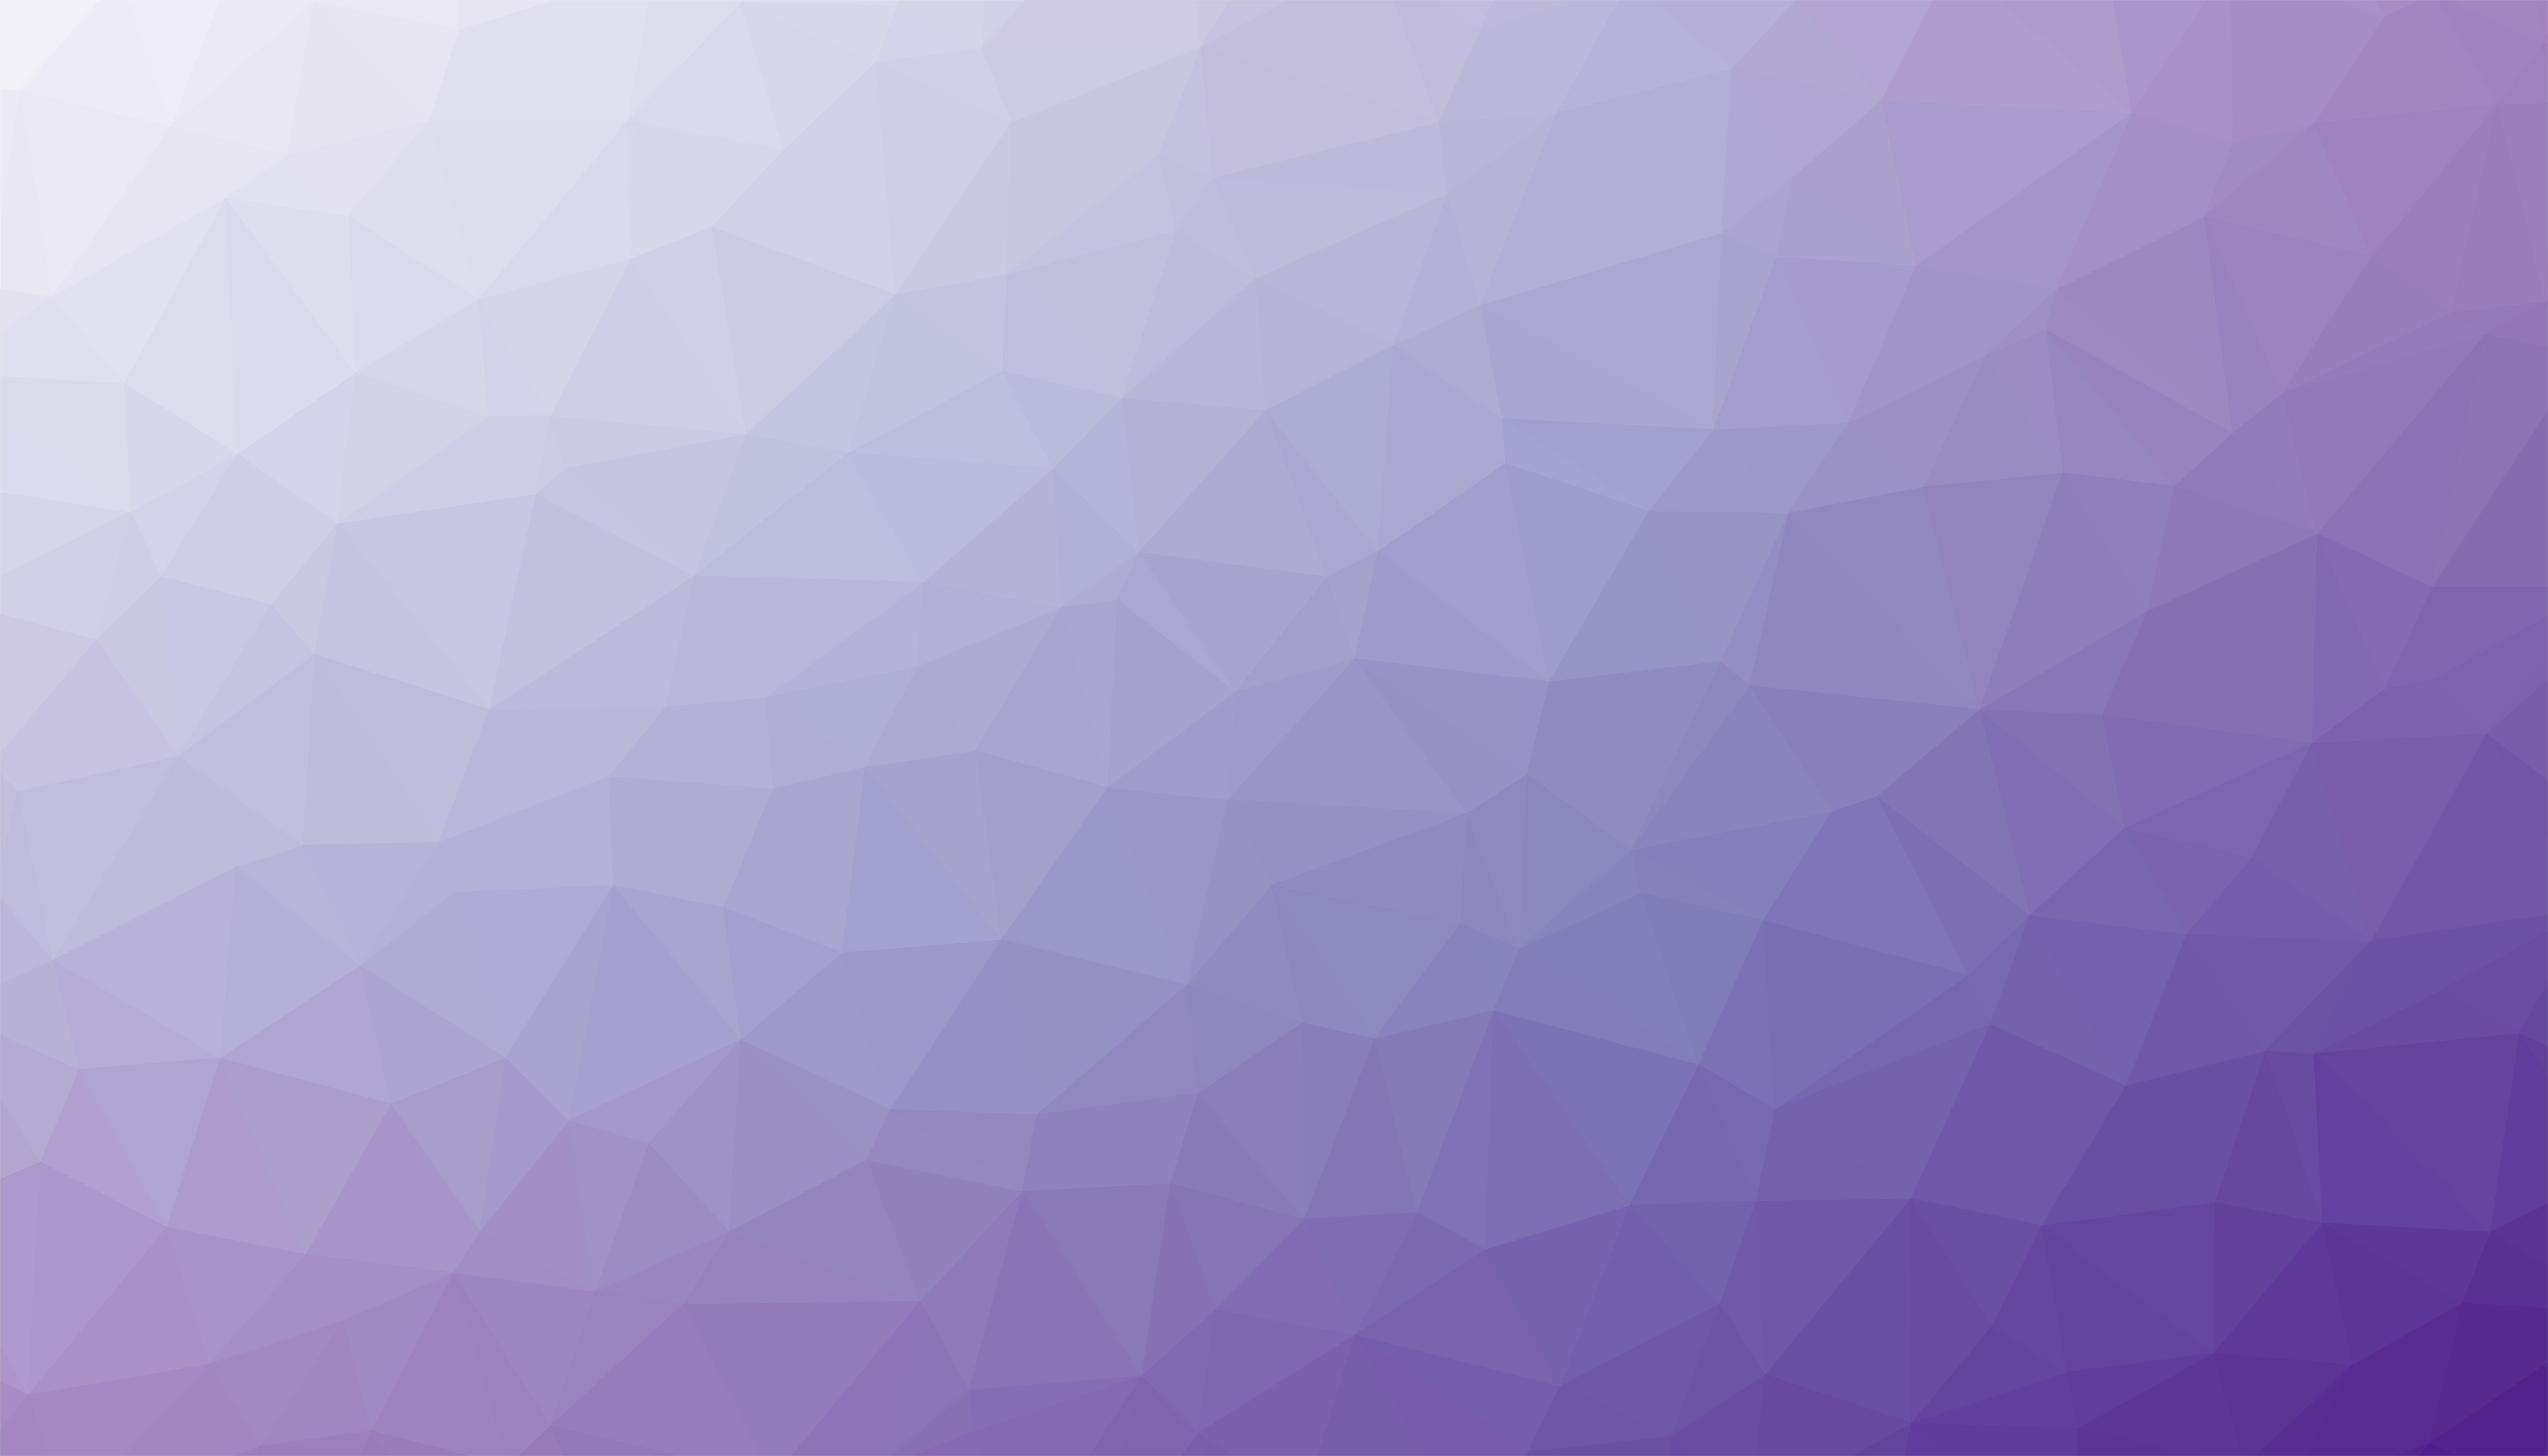 Light purple triangulated background texture vector 639990 - Download